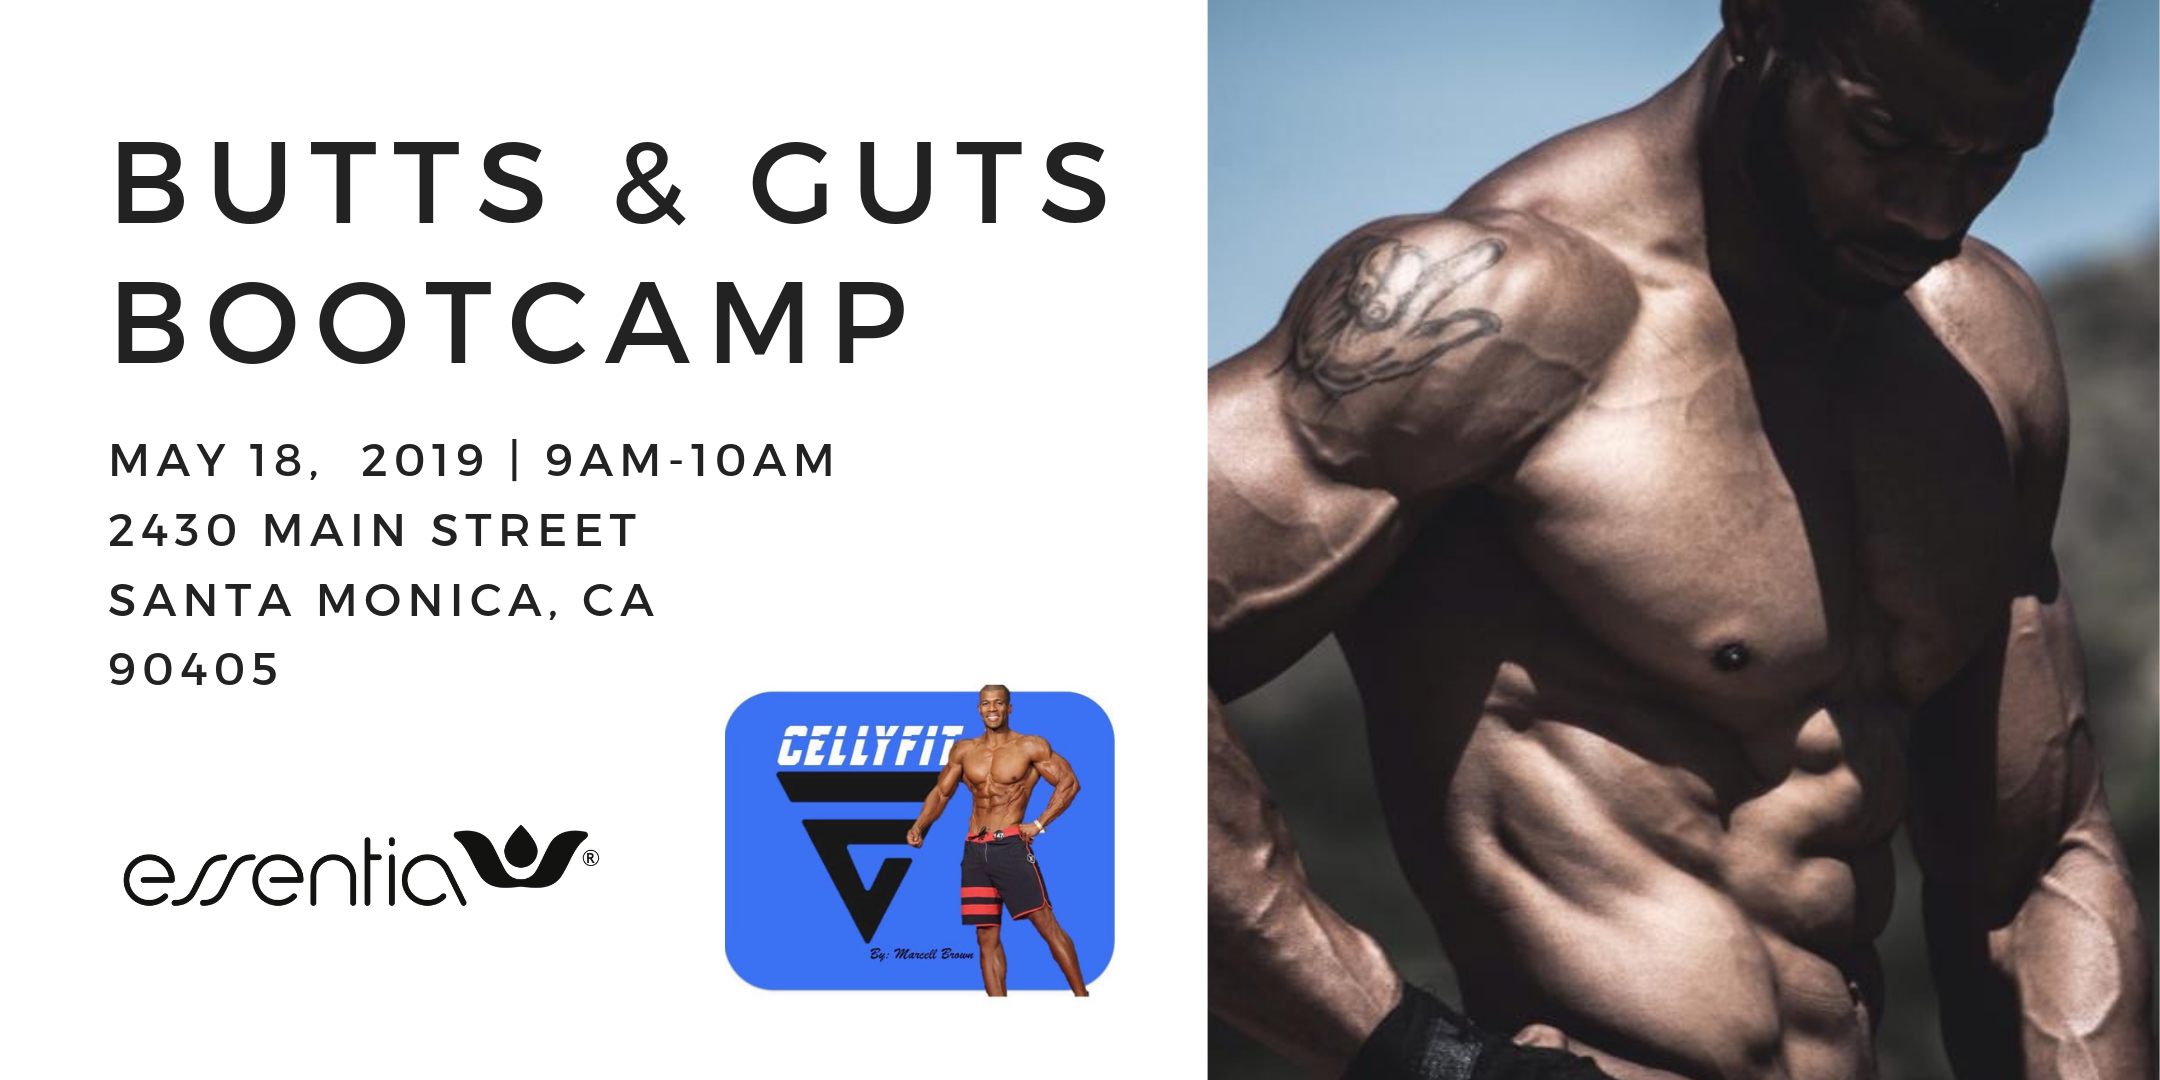 Butts and Guts Bootcamp with Marcell Brown at Essentia Santa Monica